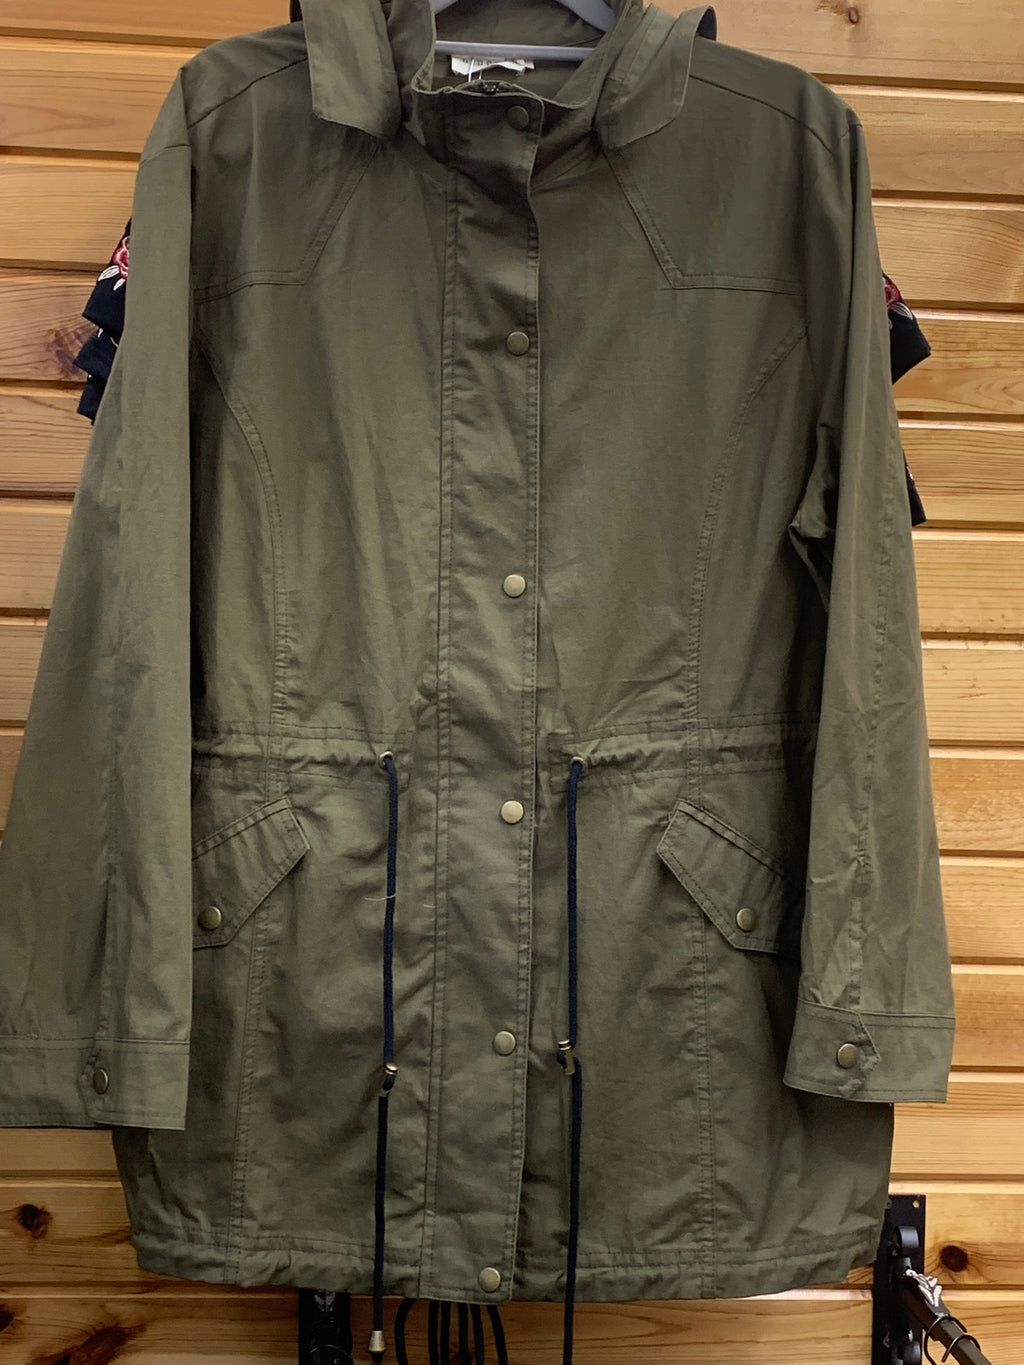 Dark Green, light wieght, Jacket with snaps and zipper